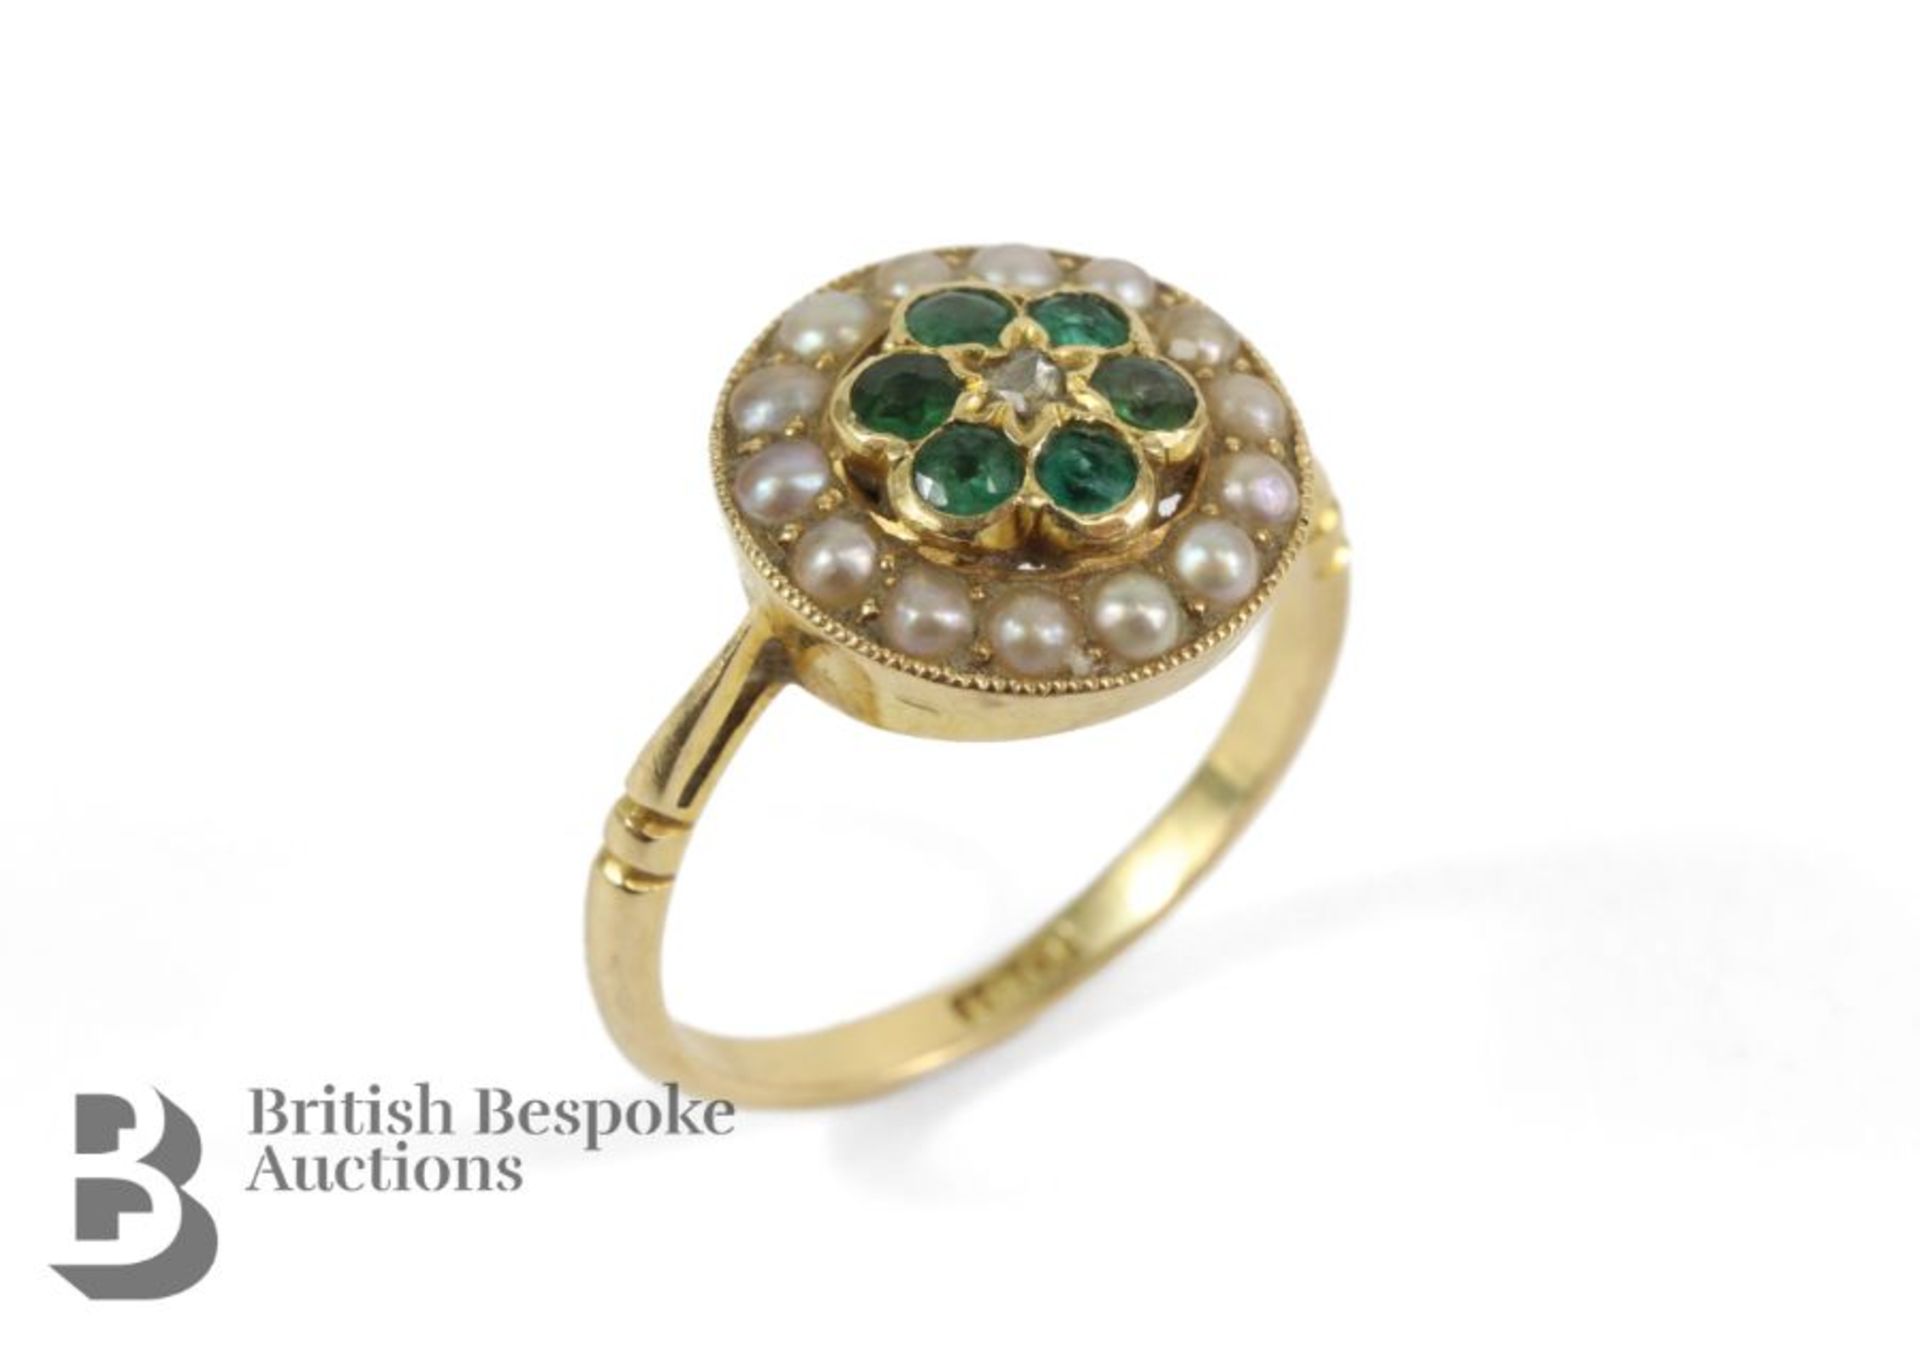 19th Century 18ct Gold Diamond, Emerald and Pearl Ring - Image 3 of 5